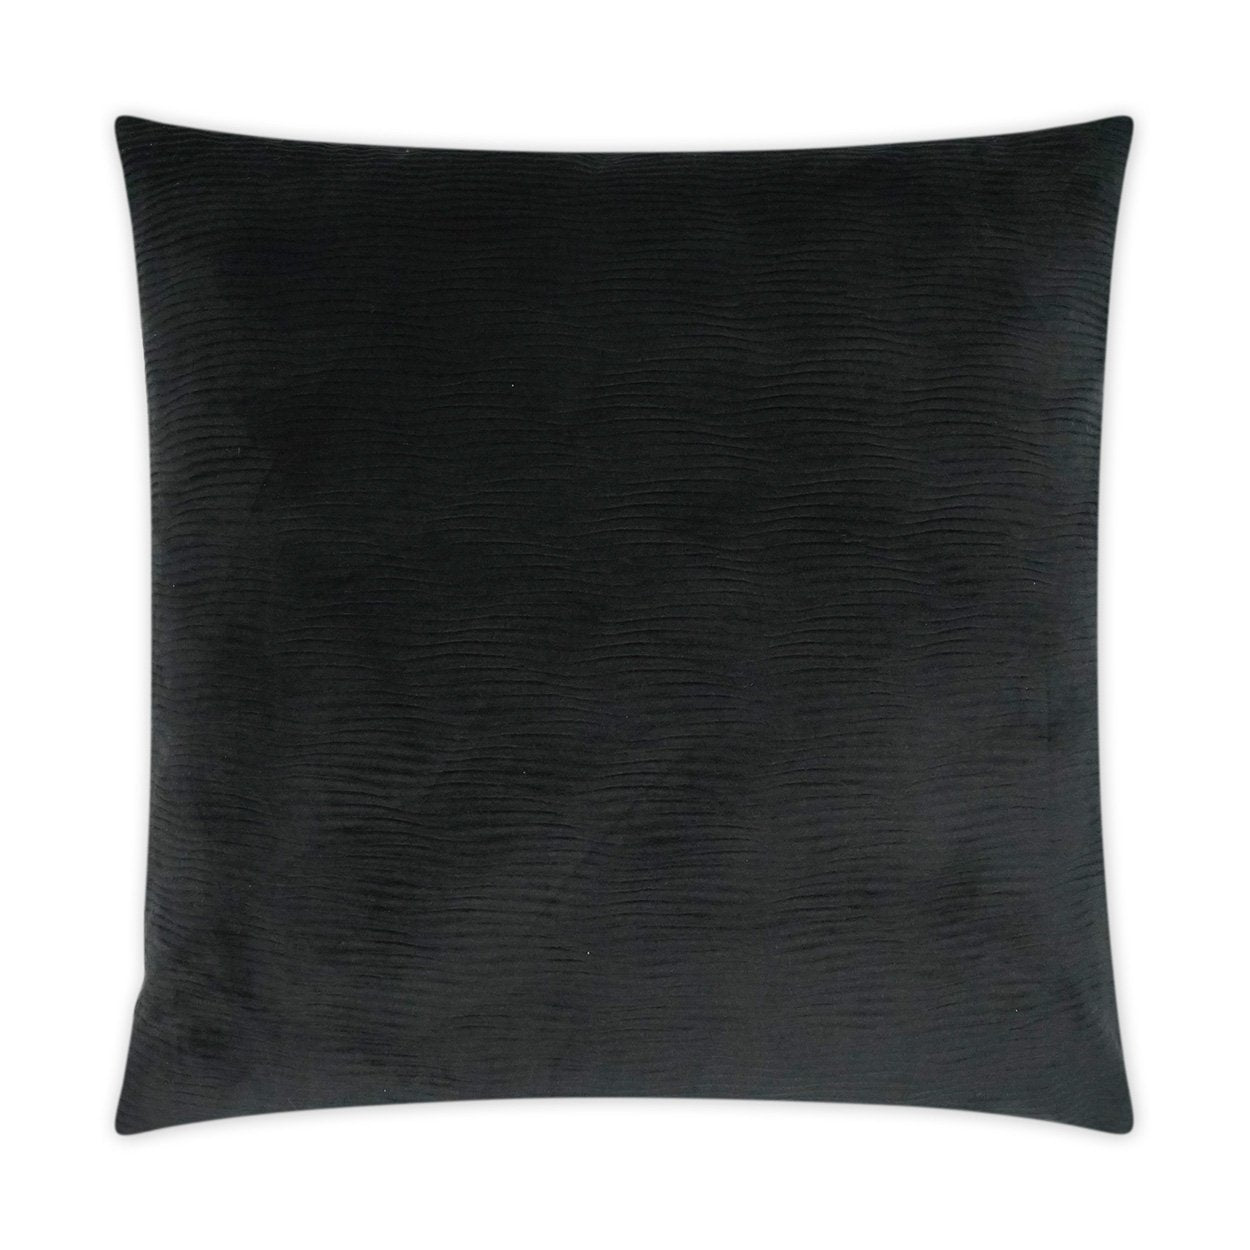 Luxury Pillow - 24” x 24” - Stream Black; Solid black in a smooth wavey patterned fabric